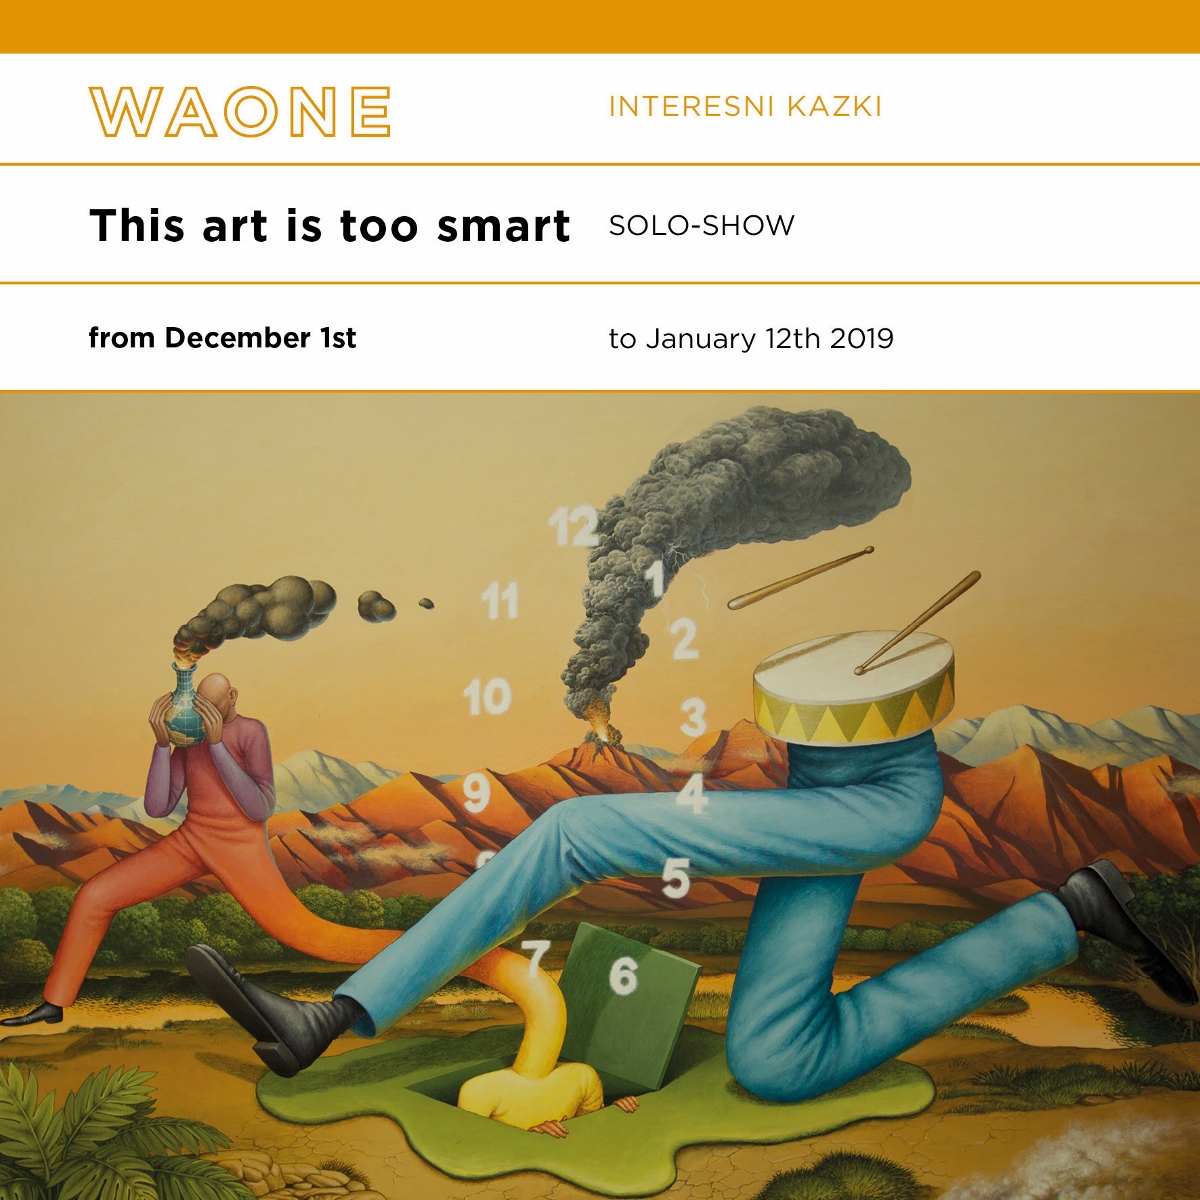 Waone - This art is too smart